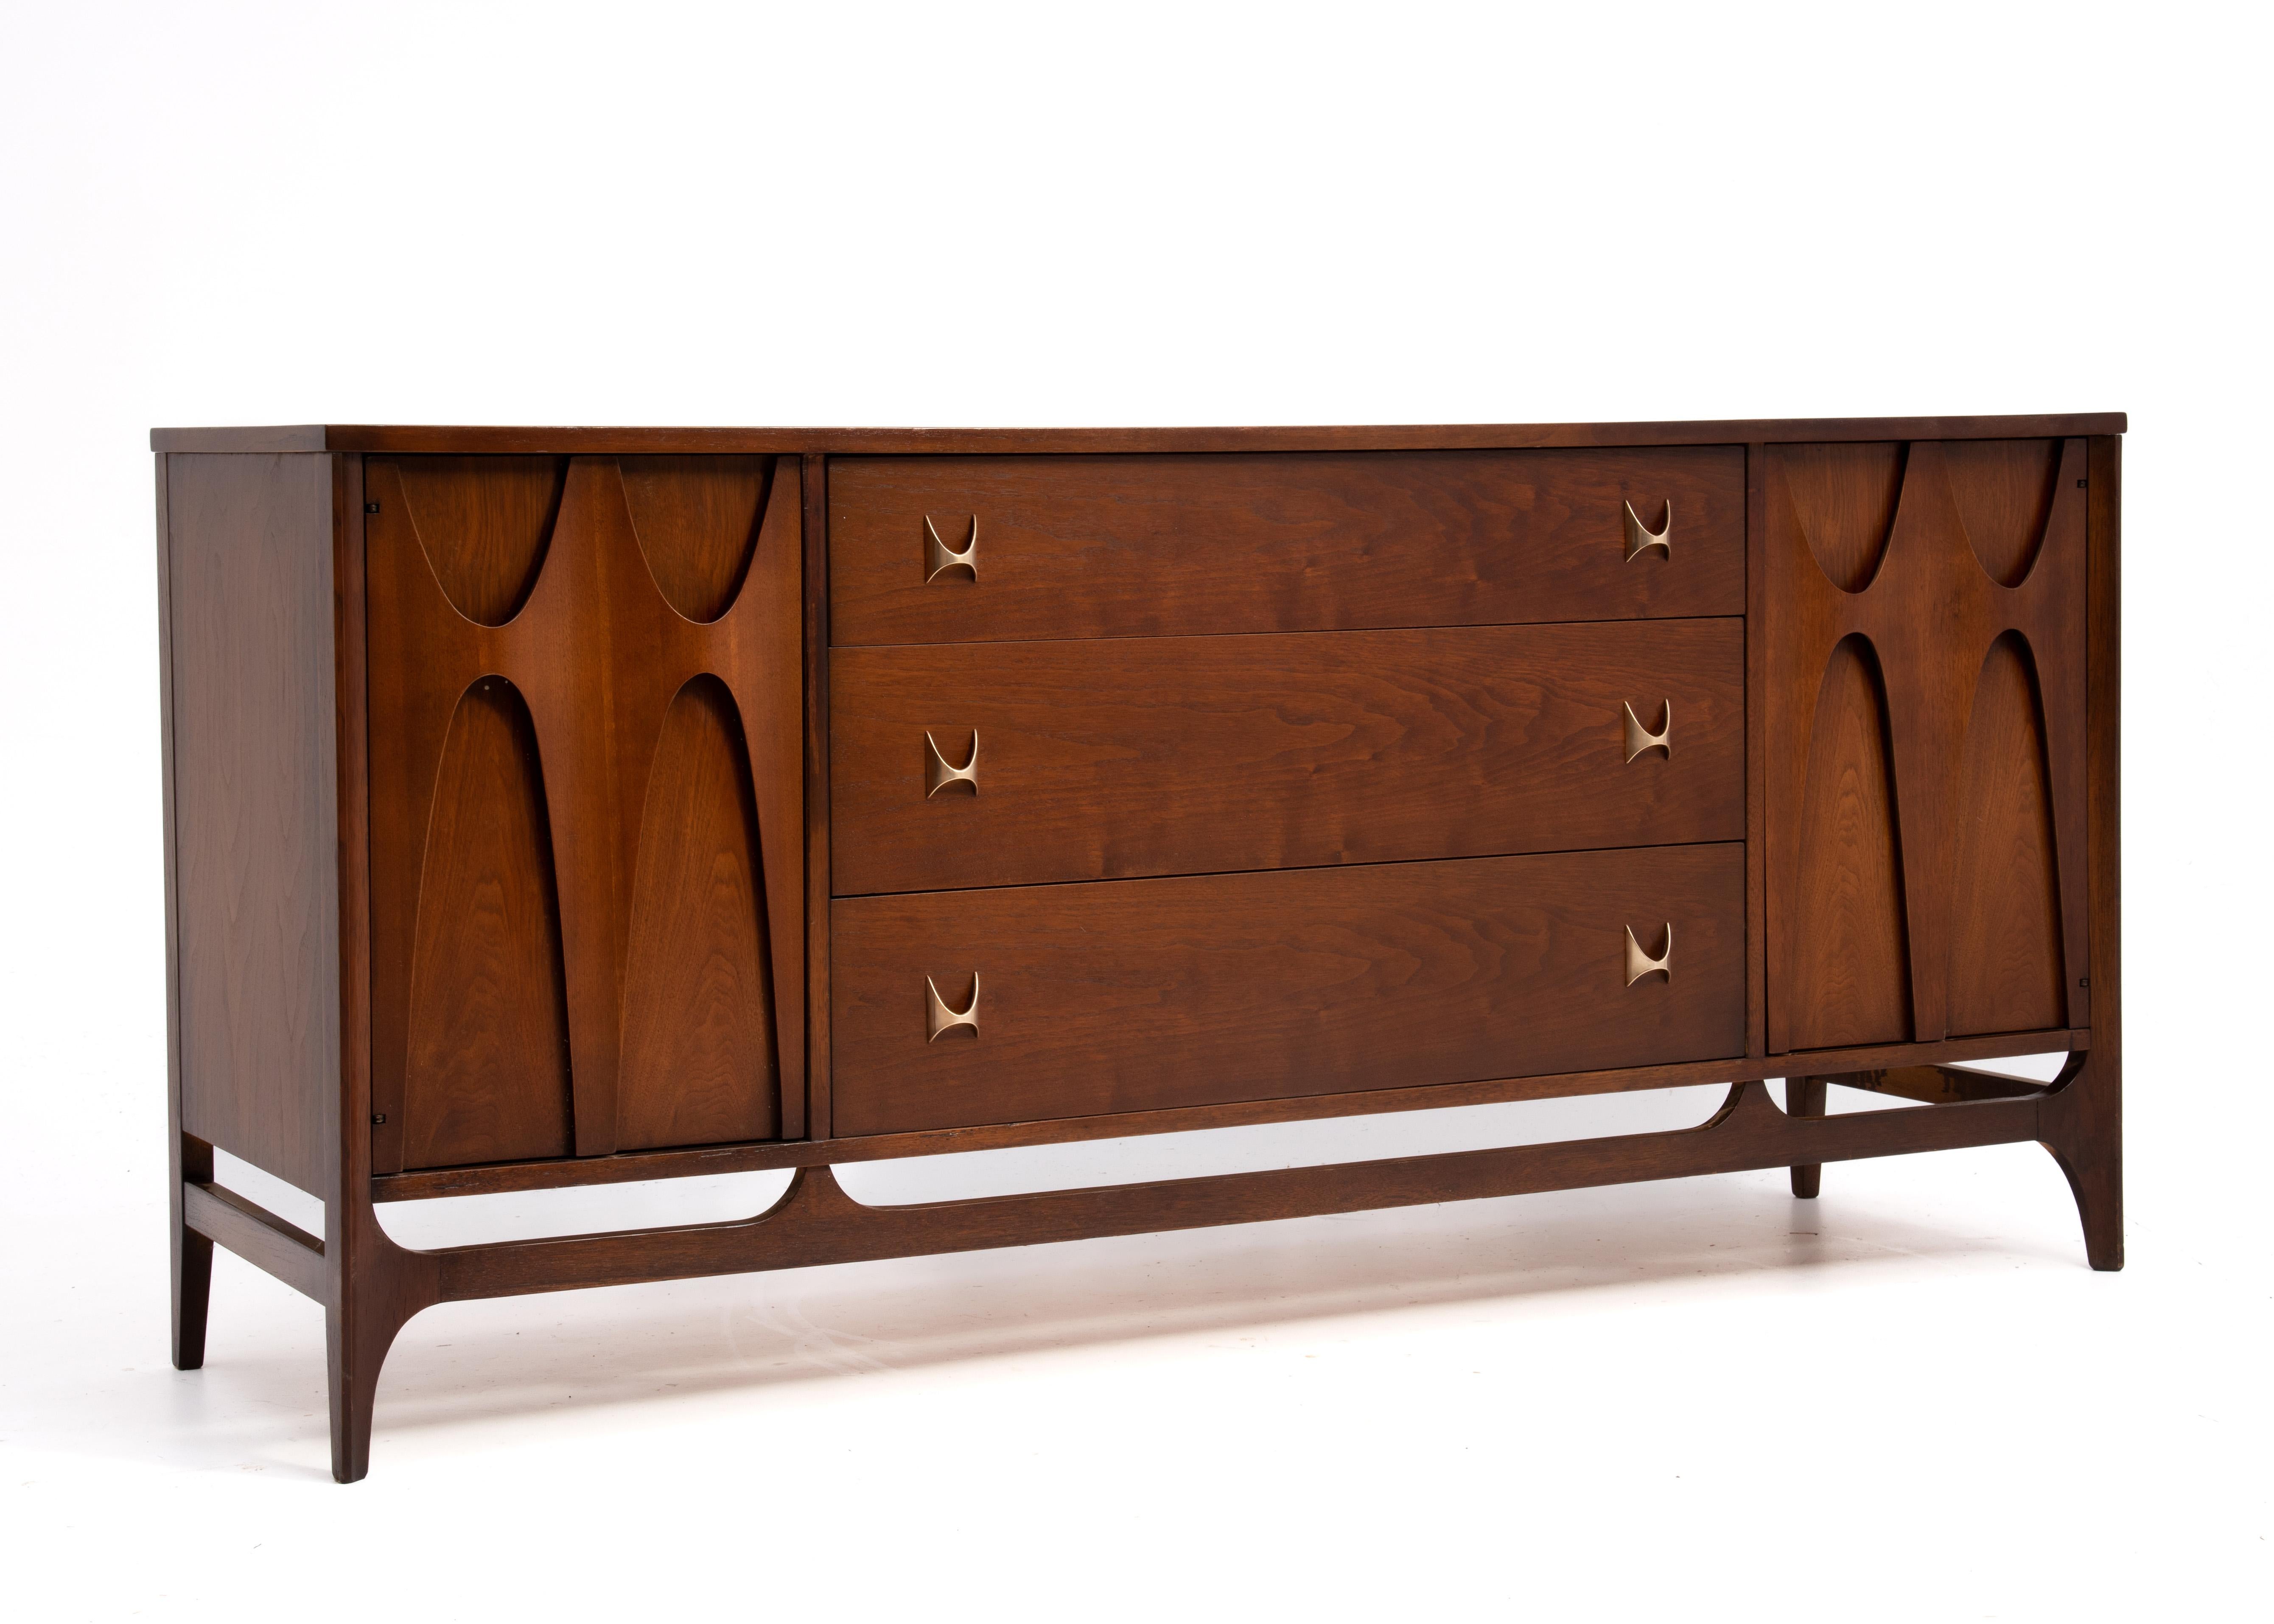 A Mid Century Modern Broyhill Brasilia three drawer walnut credenza. Two side cabinet doors and brass hardware. Its iconic design includes bentwood swoops on the doors and brass drawer pulls that were inspired by the mid-century architecture of the